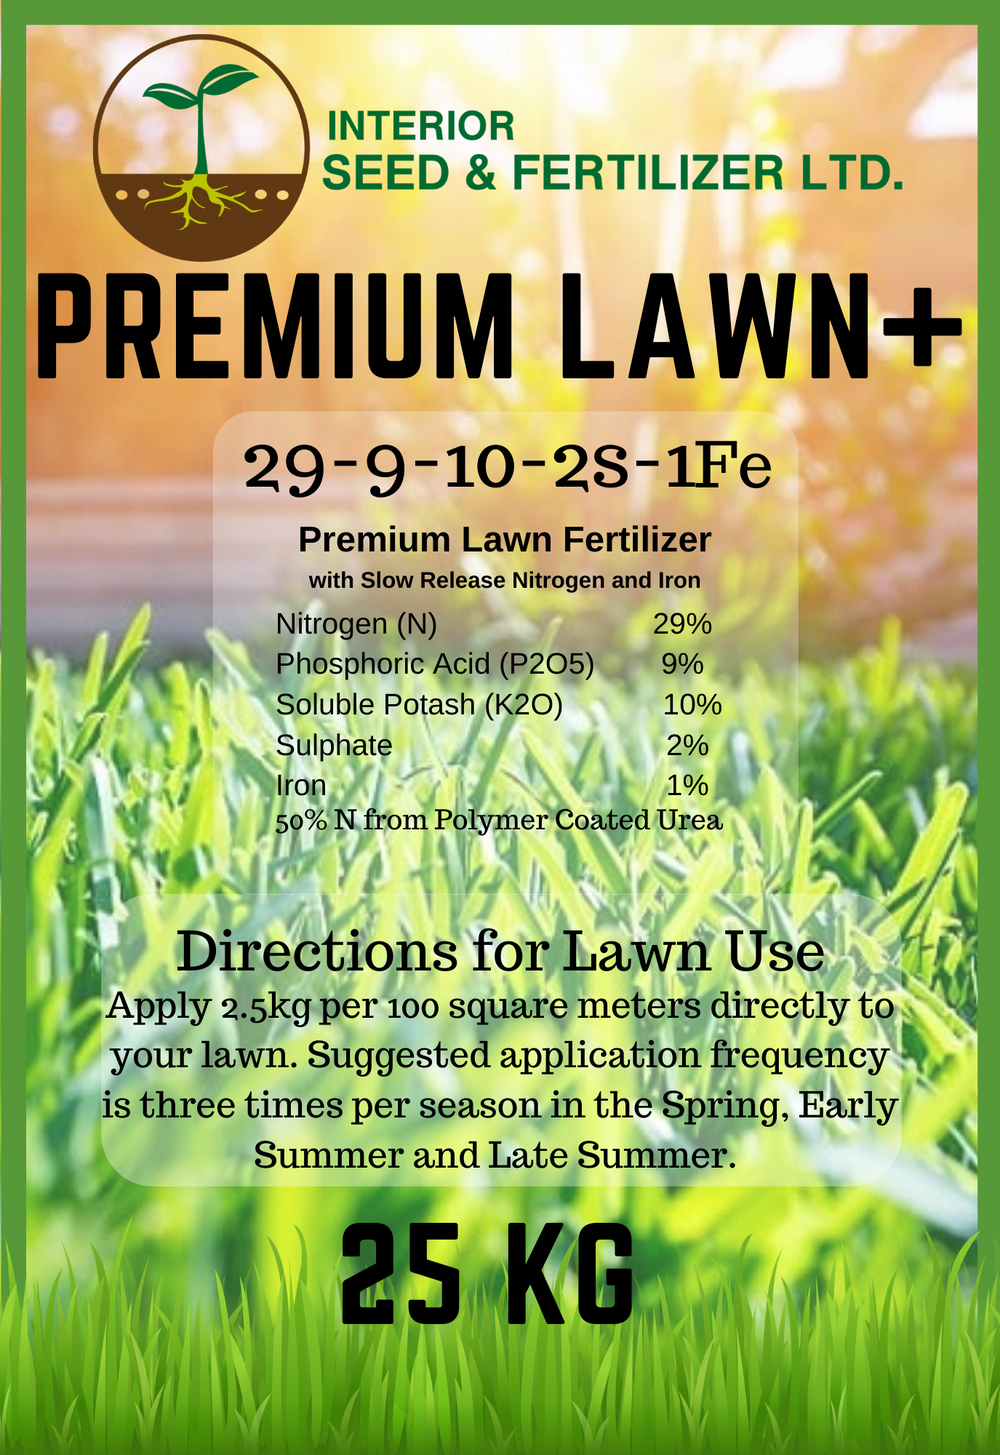 Get the most out of your lawn with this high performing blend. Premium Lawn + has all the benefits of Premium Lawn with the added benefits of Iron. Iron gives your lawn an even deeper more lush appearance.  From Interior Seed and Fertilizer Garden Center and Nursery Cranbrook BC